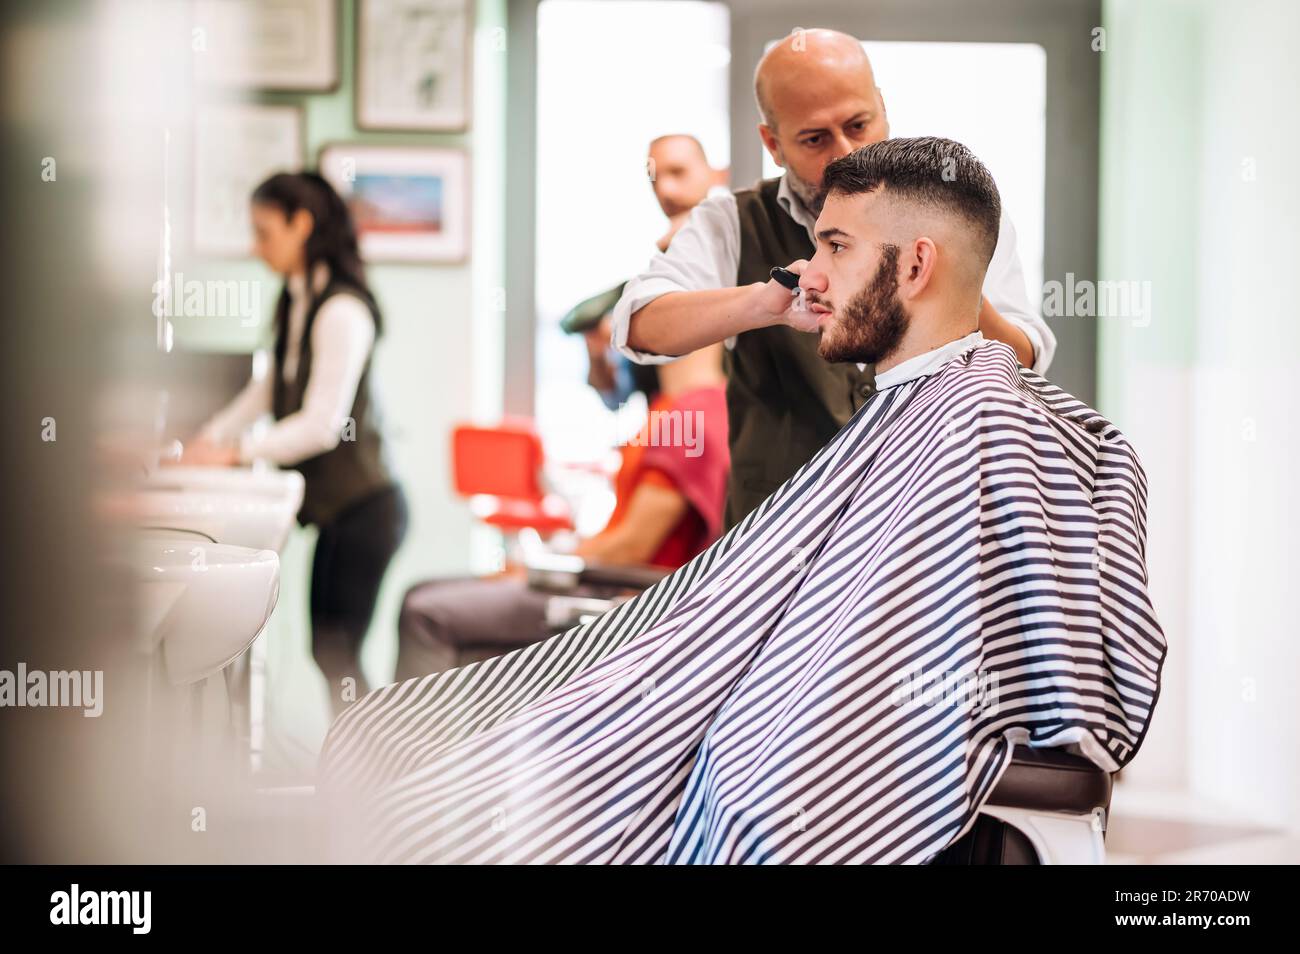 - Barber Page images stripe stock hi-res photography - 3 Alamy and